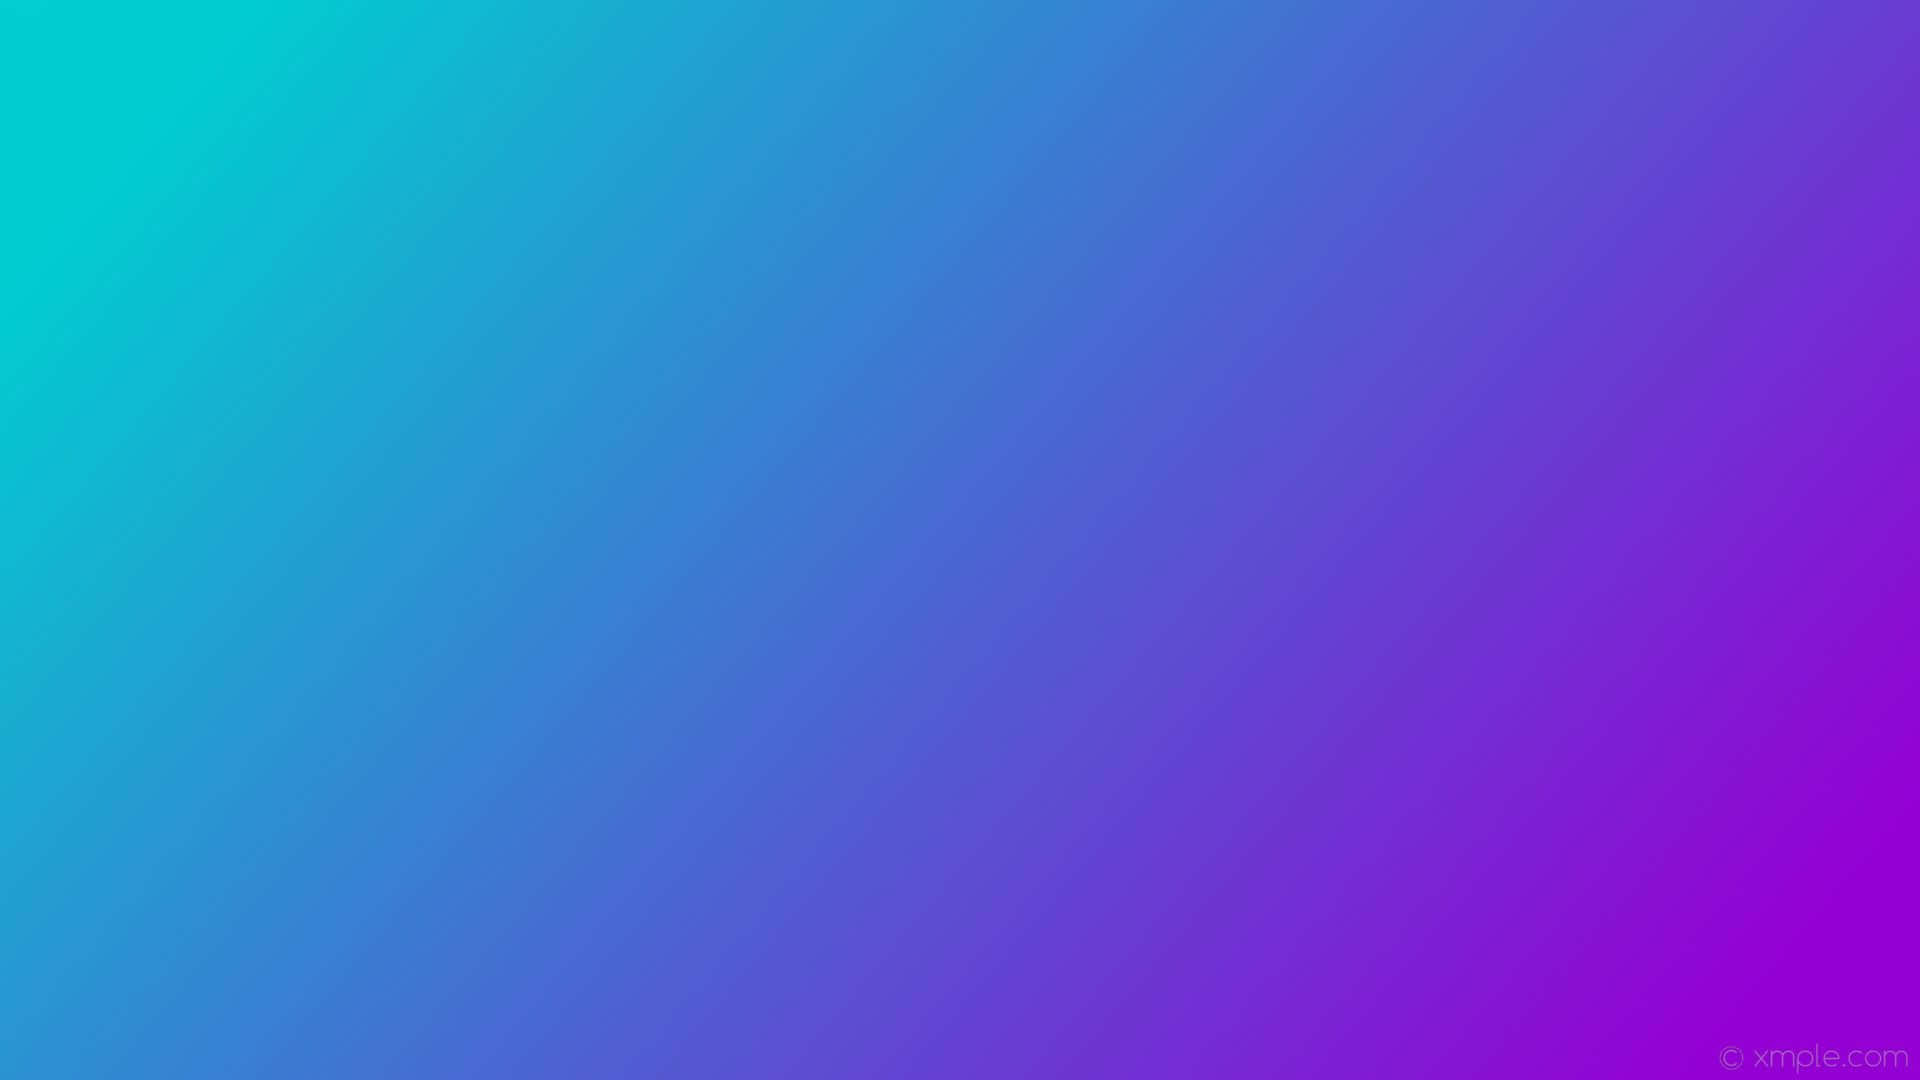 100+] Blue Ombre Background s 